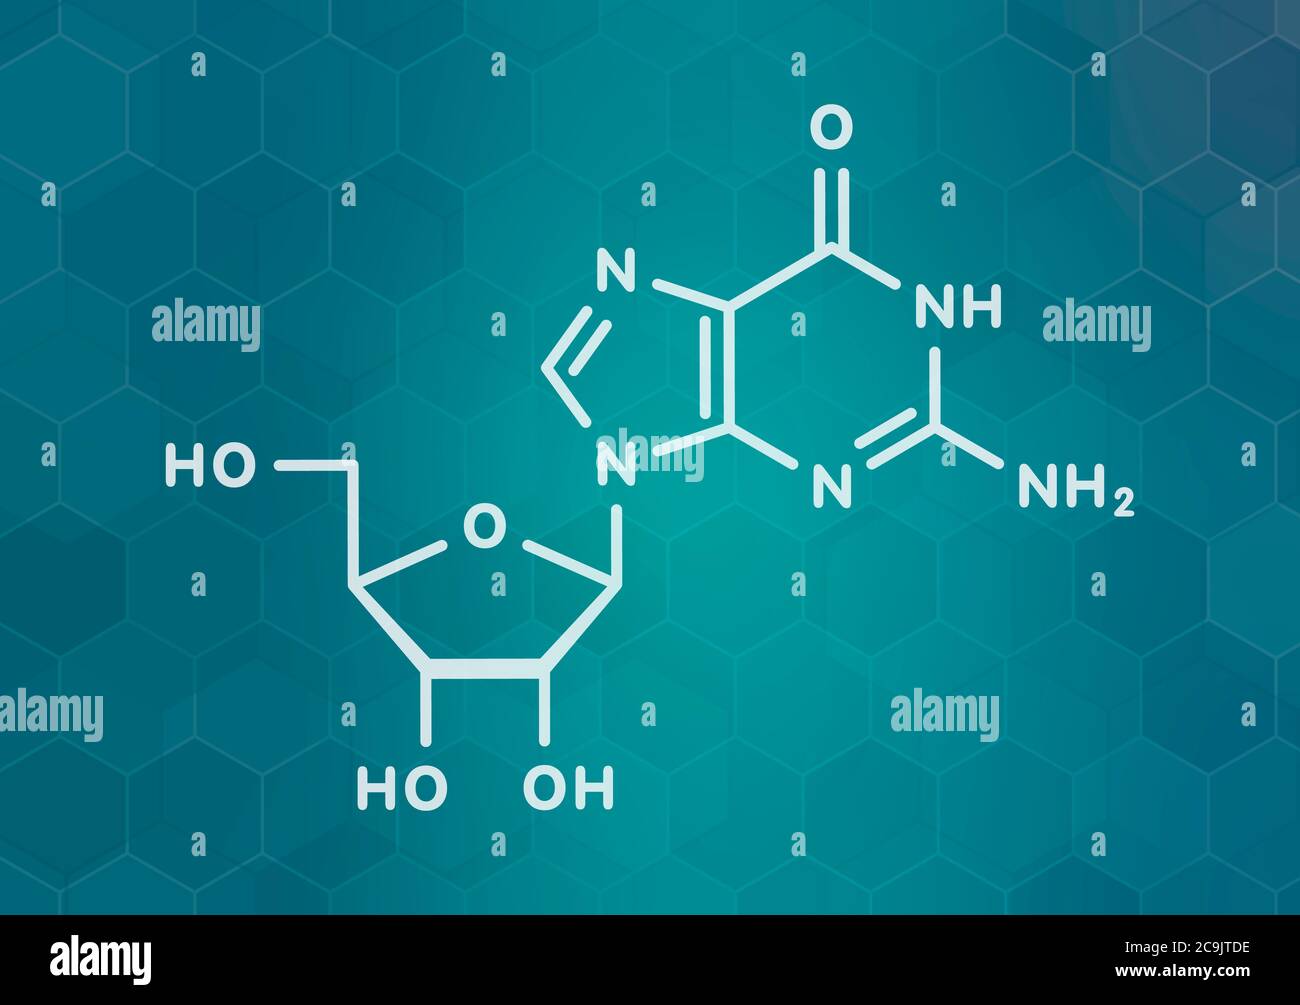 Guanosine purine nucleoside molecule. Important component of GTP, GDP, cGMP, GMP and RNA. White skeletal formula on dark teal gradient background with Stock Photo